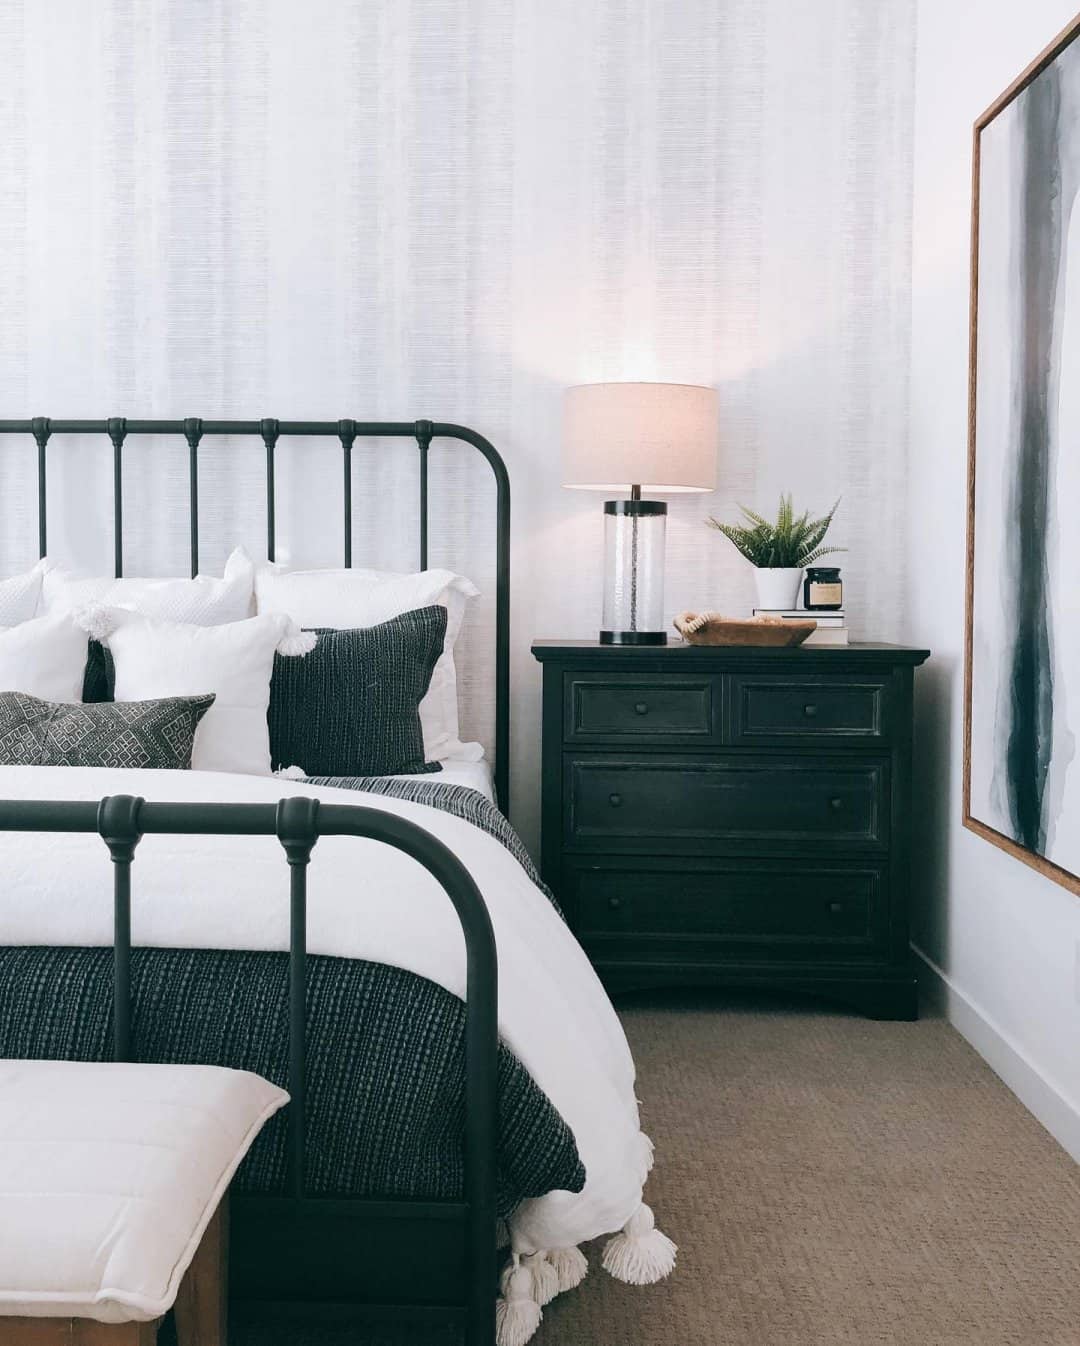 Usher In Traditional Vibes With An Old-School Platform Bed